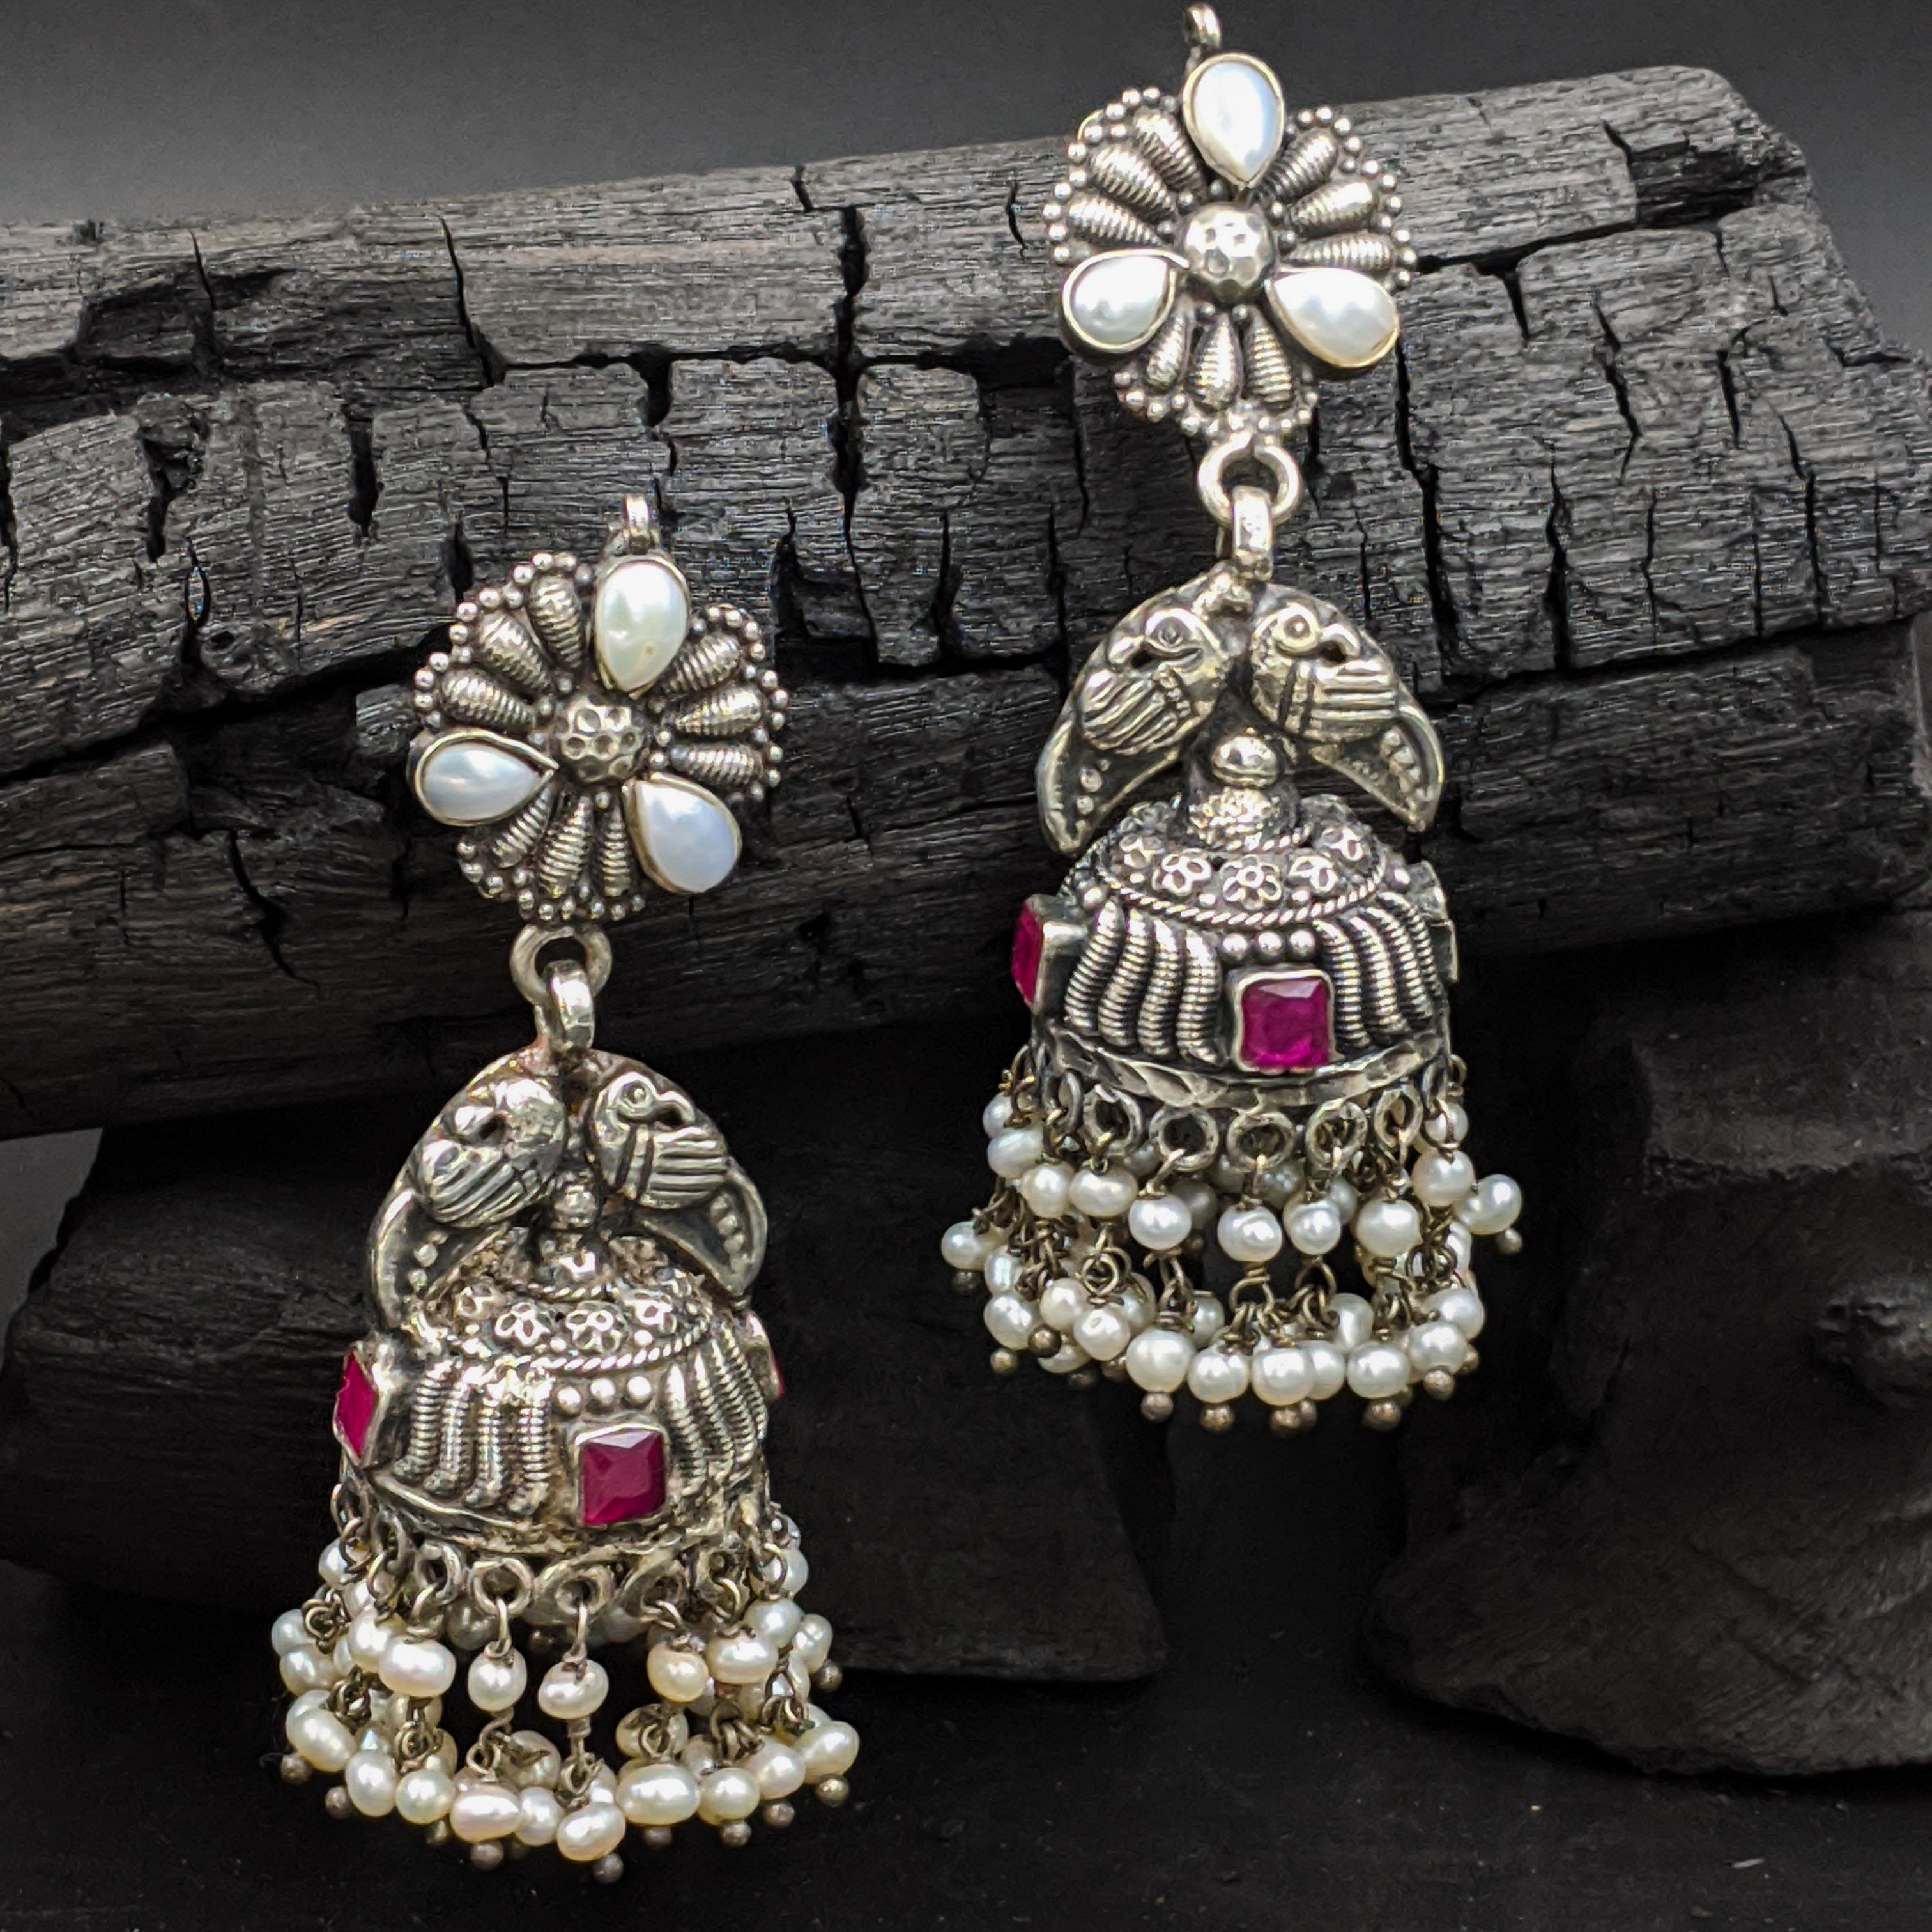 Buy Online Antique Silver Jhumka Earrings at low prices - Order Now!